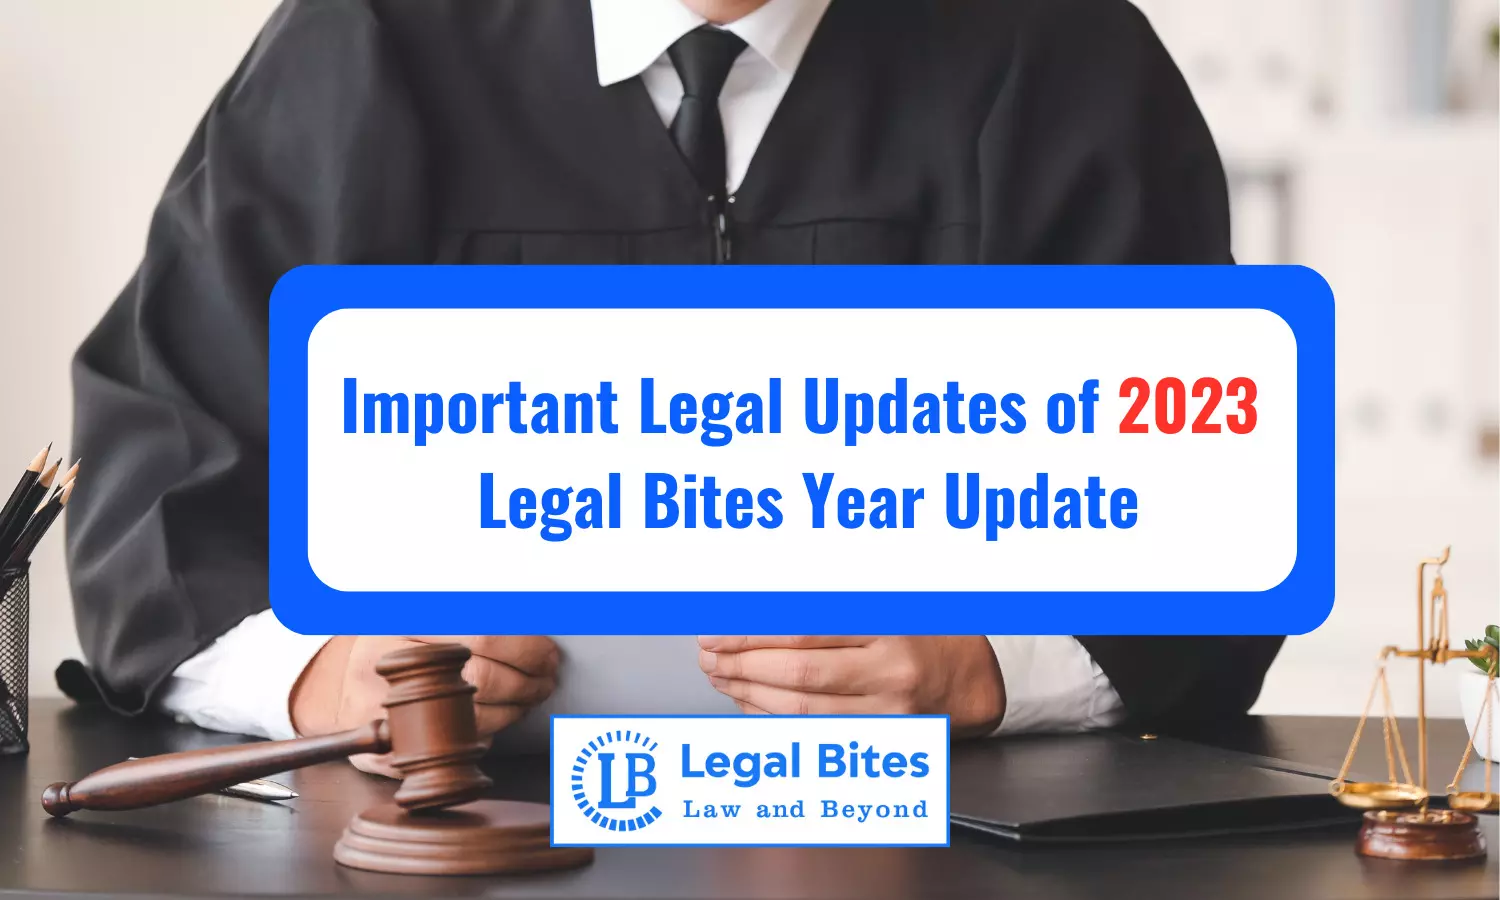 Important Legal Updates of 2023 - Legal Bites Year Update